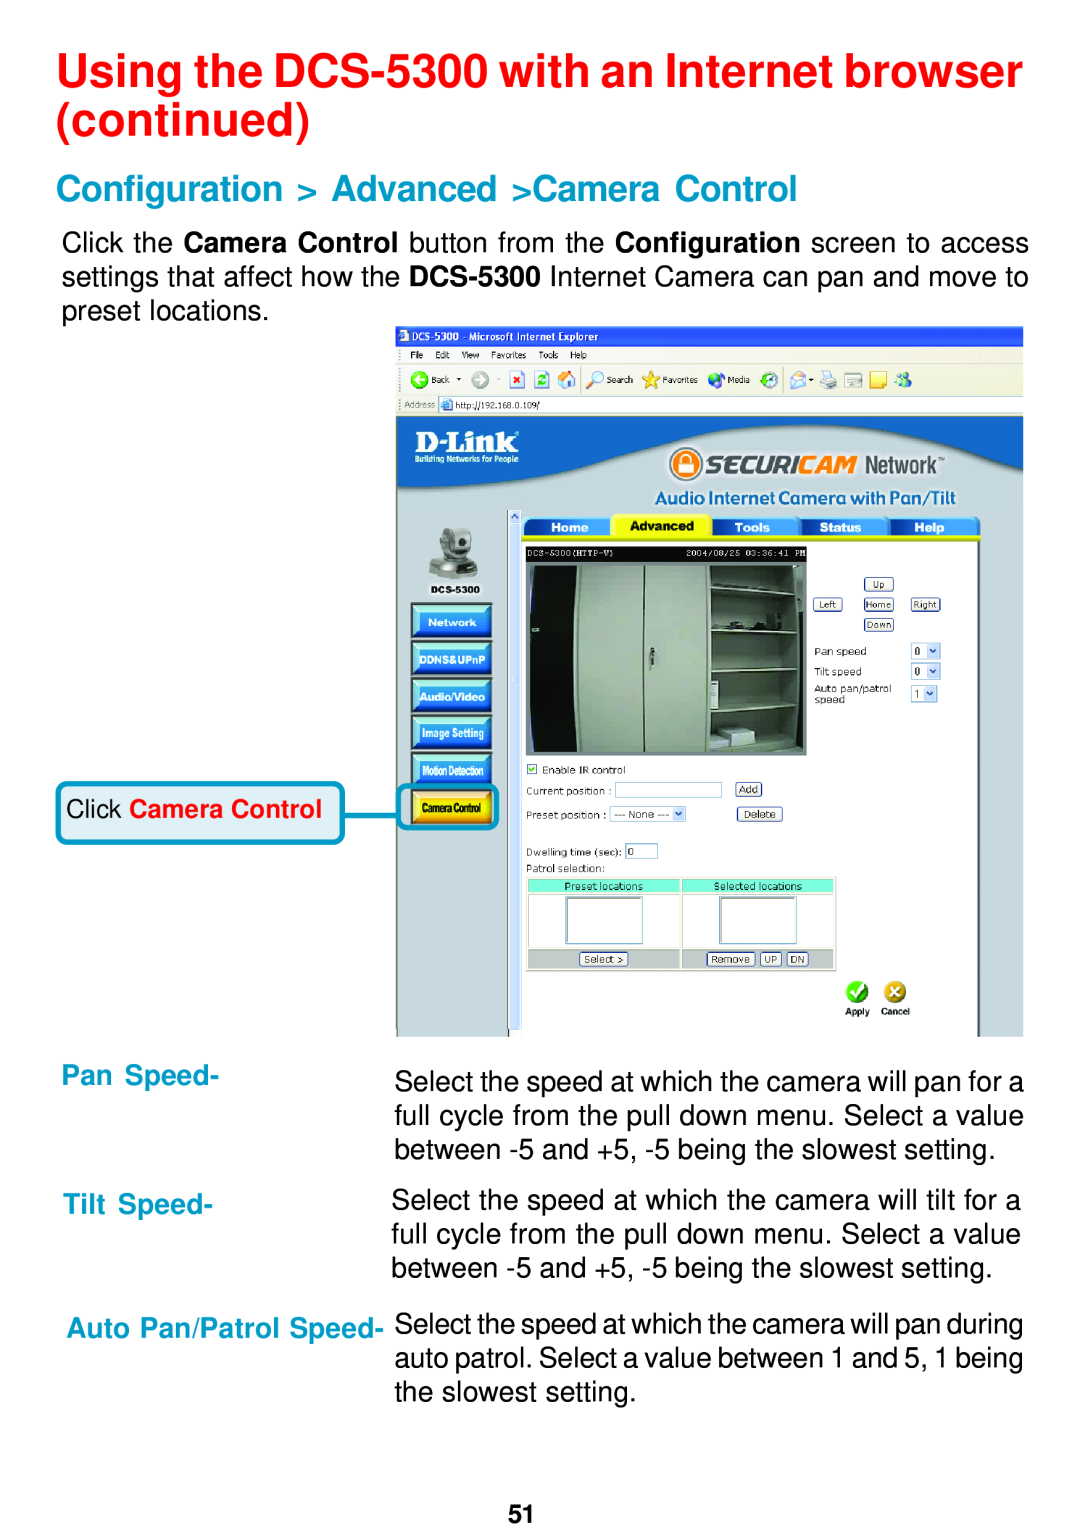 D-Link manual Configuration Advanced Camera Control, Using the DCS-5300 with an Internet browser continued 